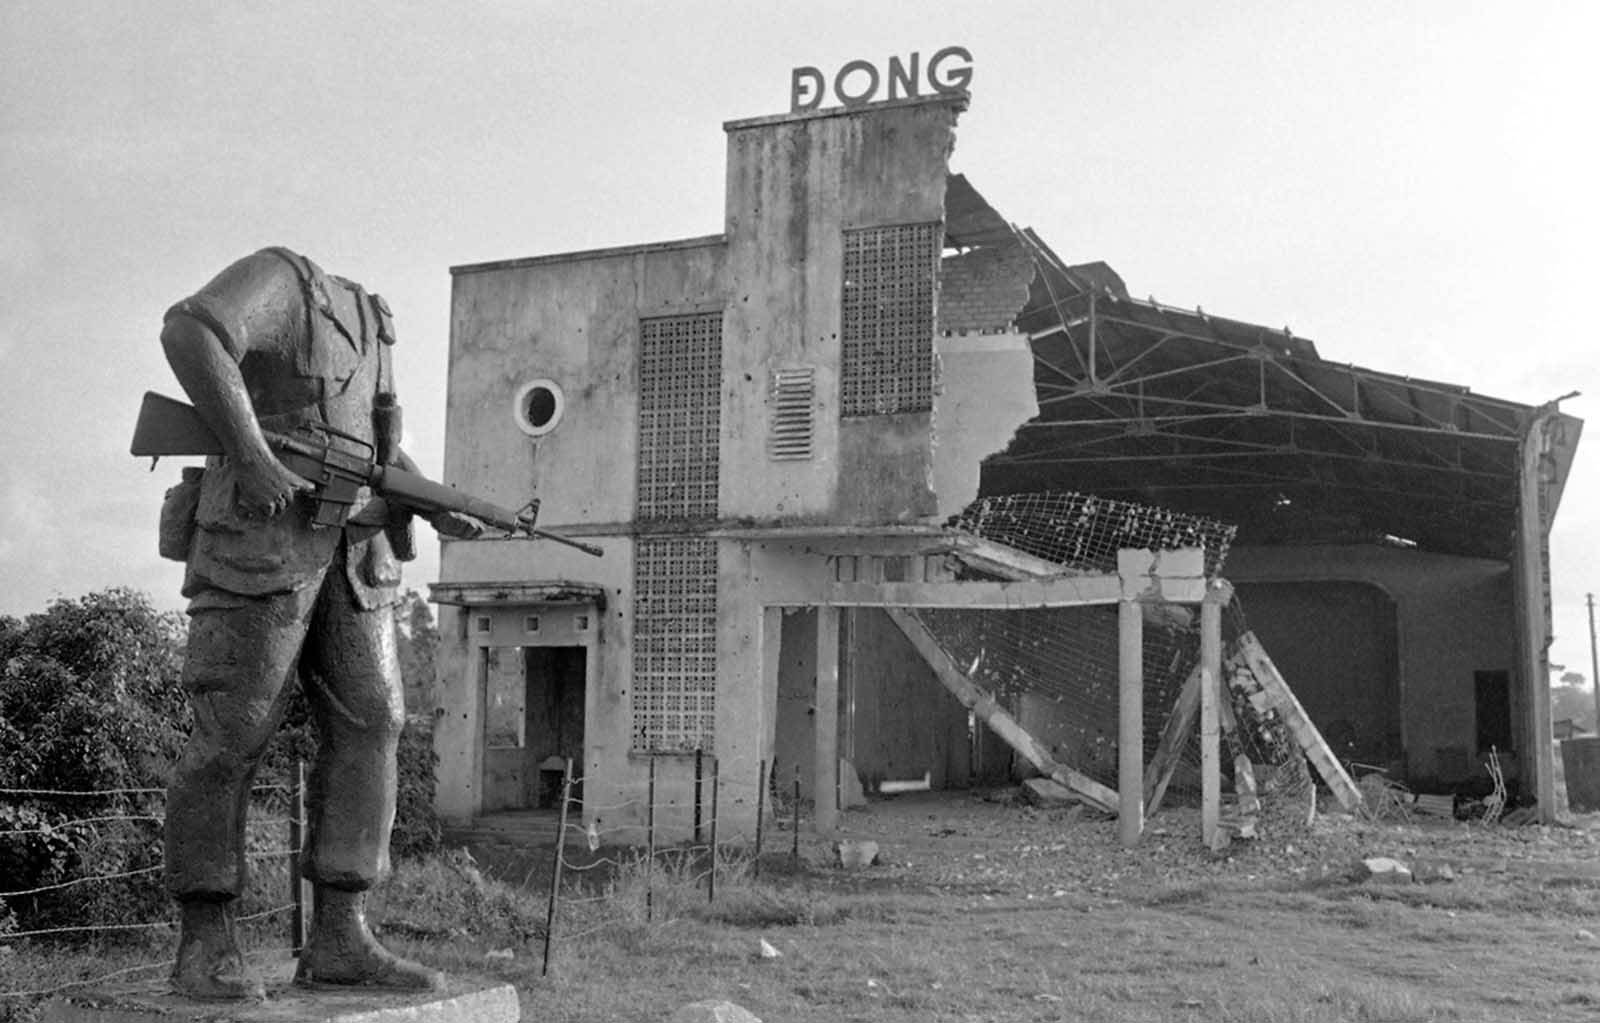 A beheaded statue of an American soldier stands next to a bombed-out theater near the district town of Cu Chi, northwest of Saigon, on December 13, 1972. The statue was placed by troops of the U.S. 25th Infantry Division before they were withdrawn from Vietnam two years earlier. Its head was lost in the explosion that destroyed the theater in background.